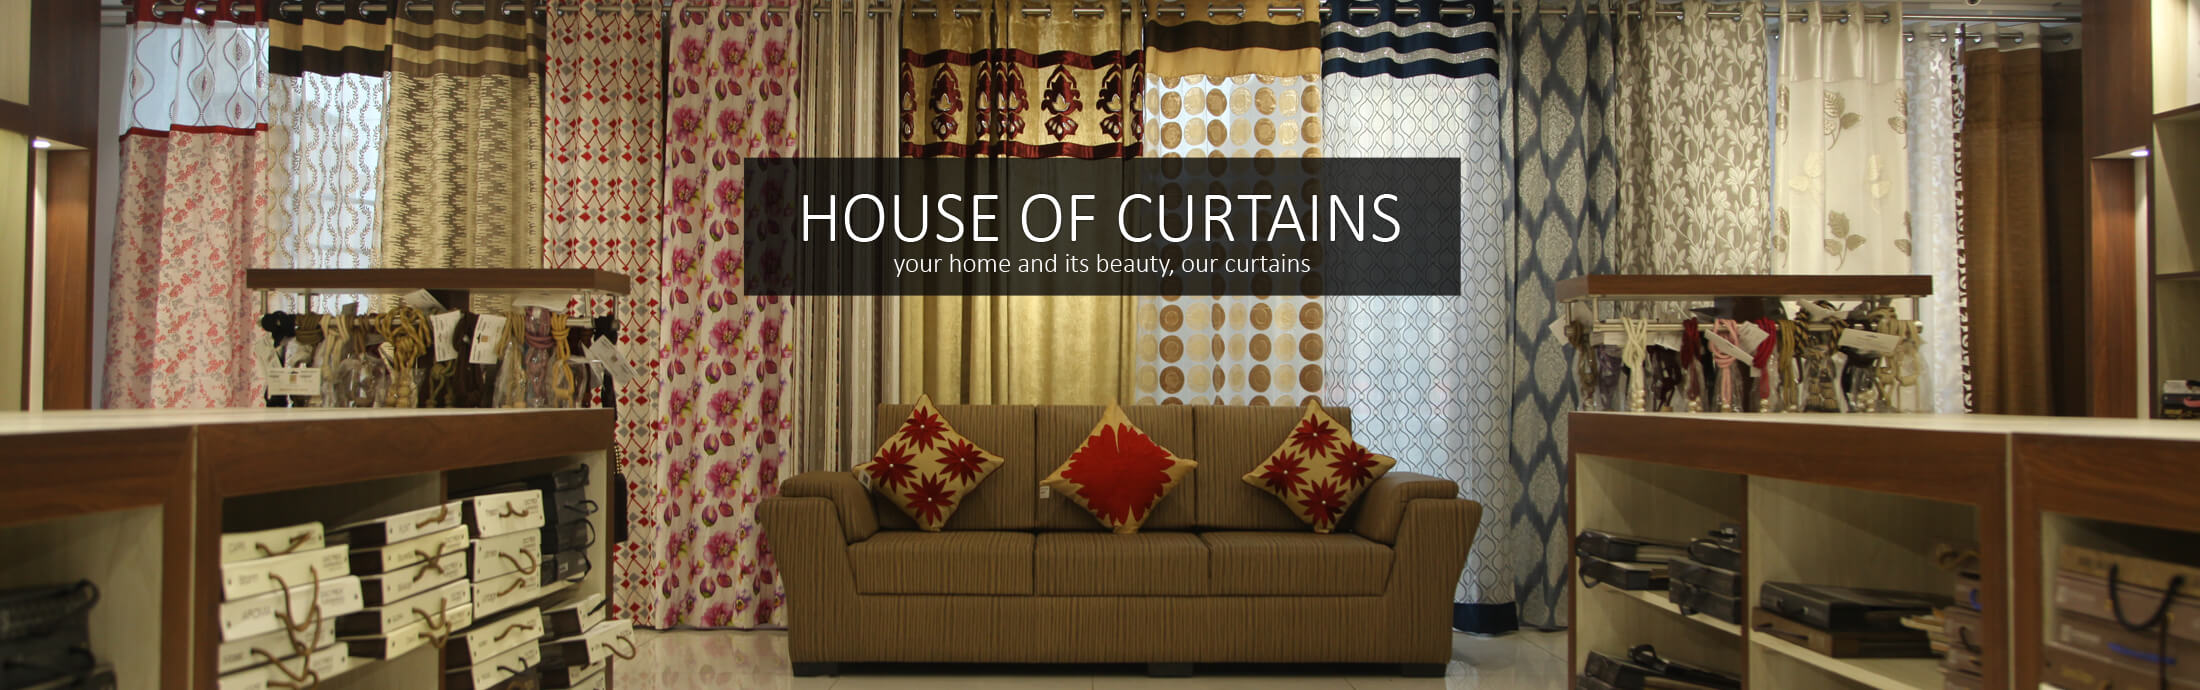 House of Curtains